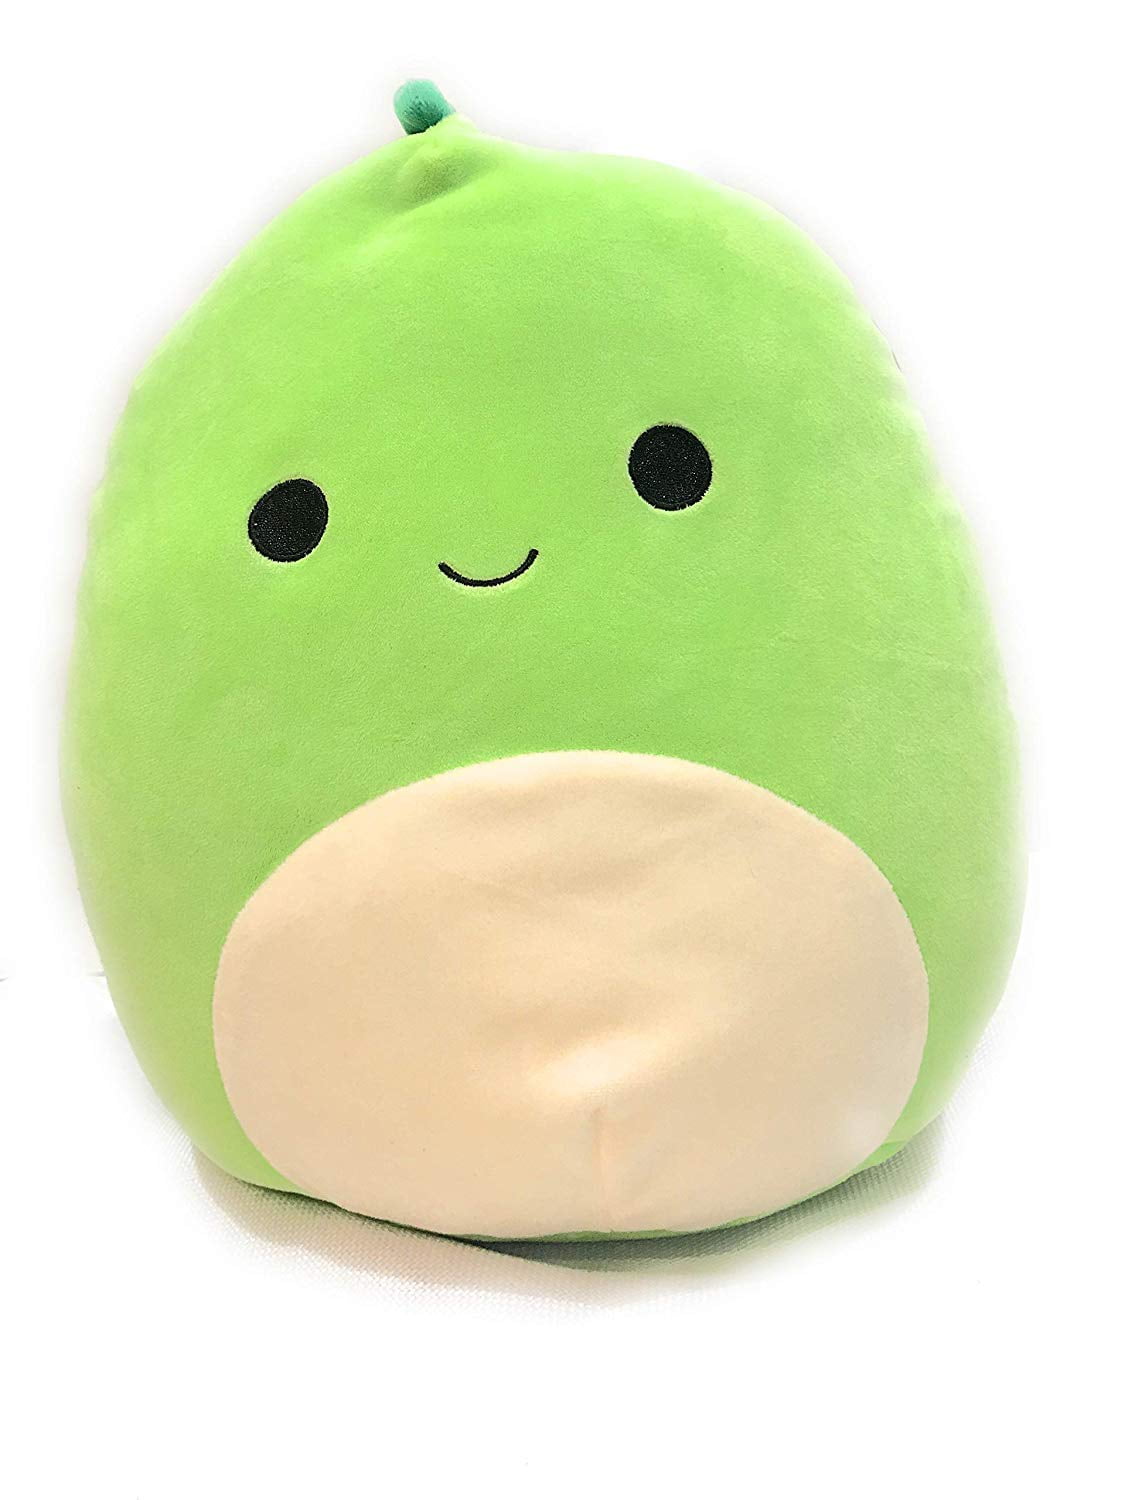 Squishmallows Henry the Green Turtle 12 inch Plush Toy for sale online 